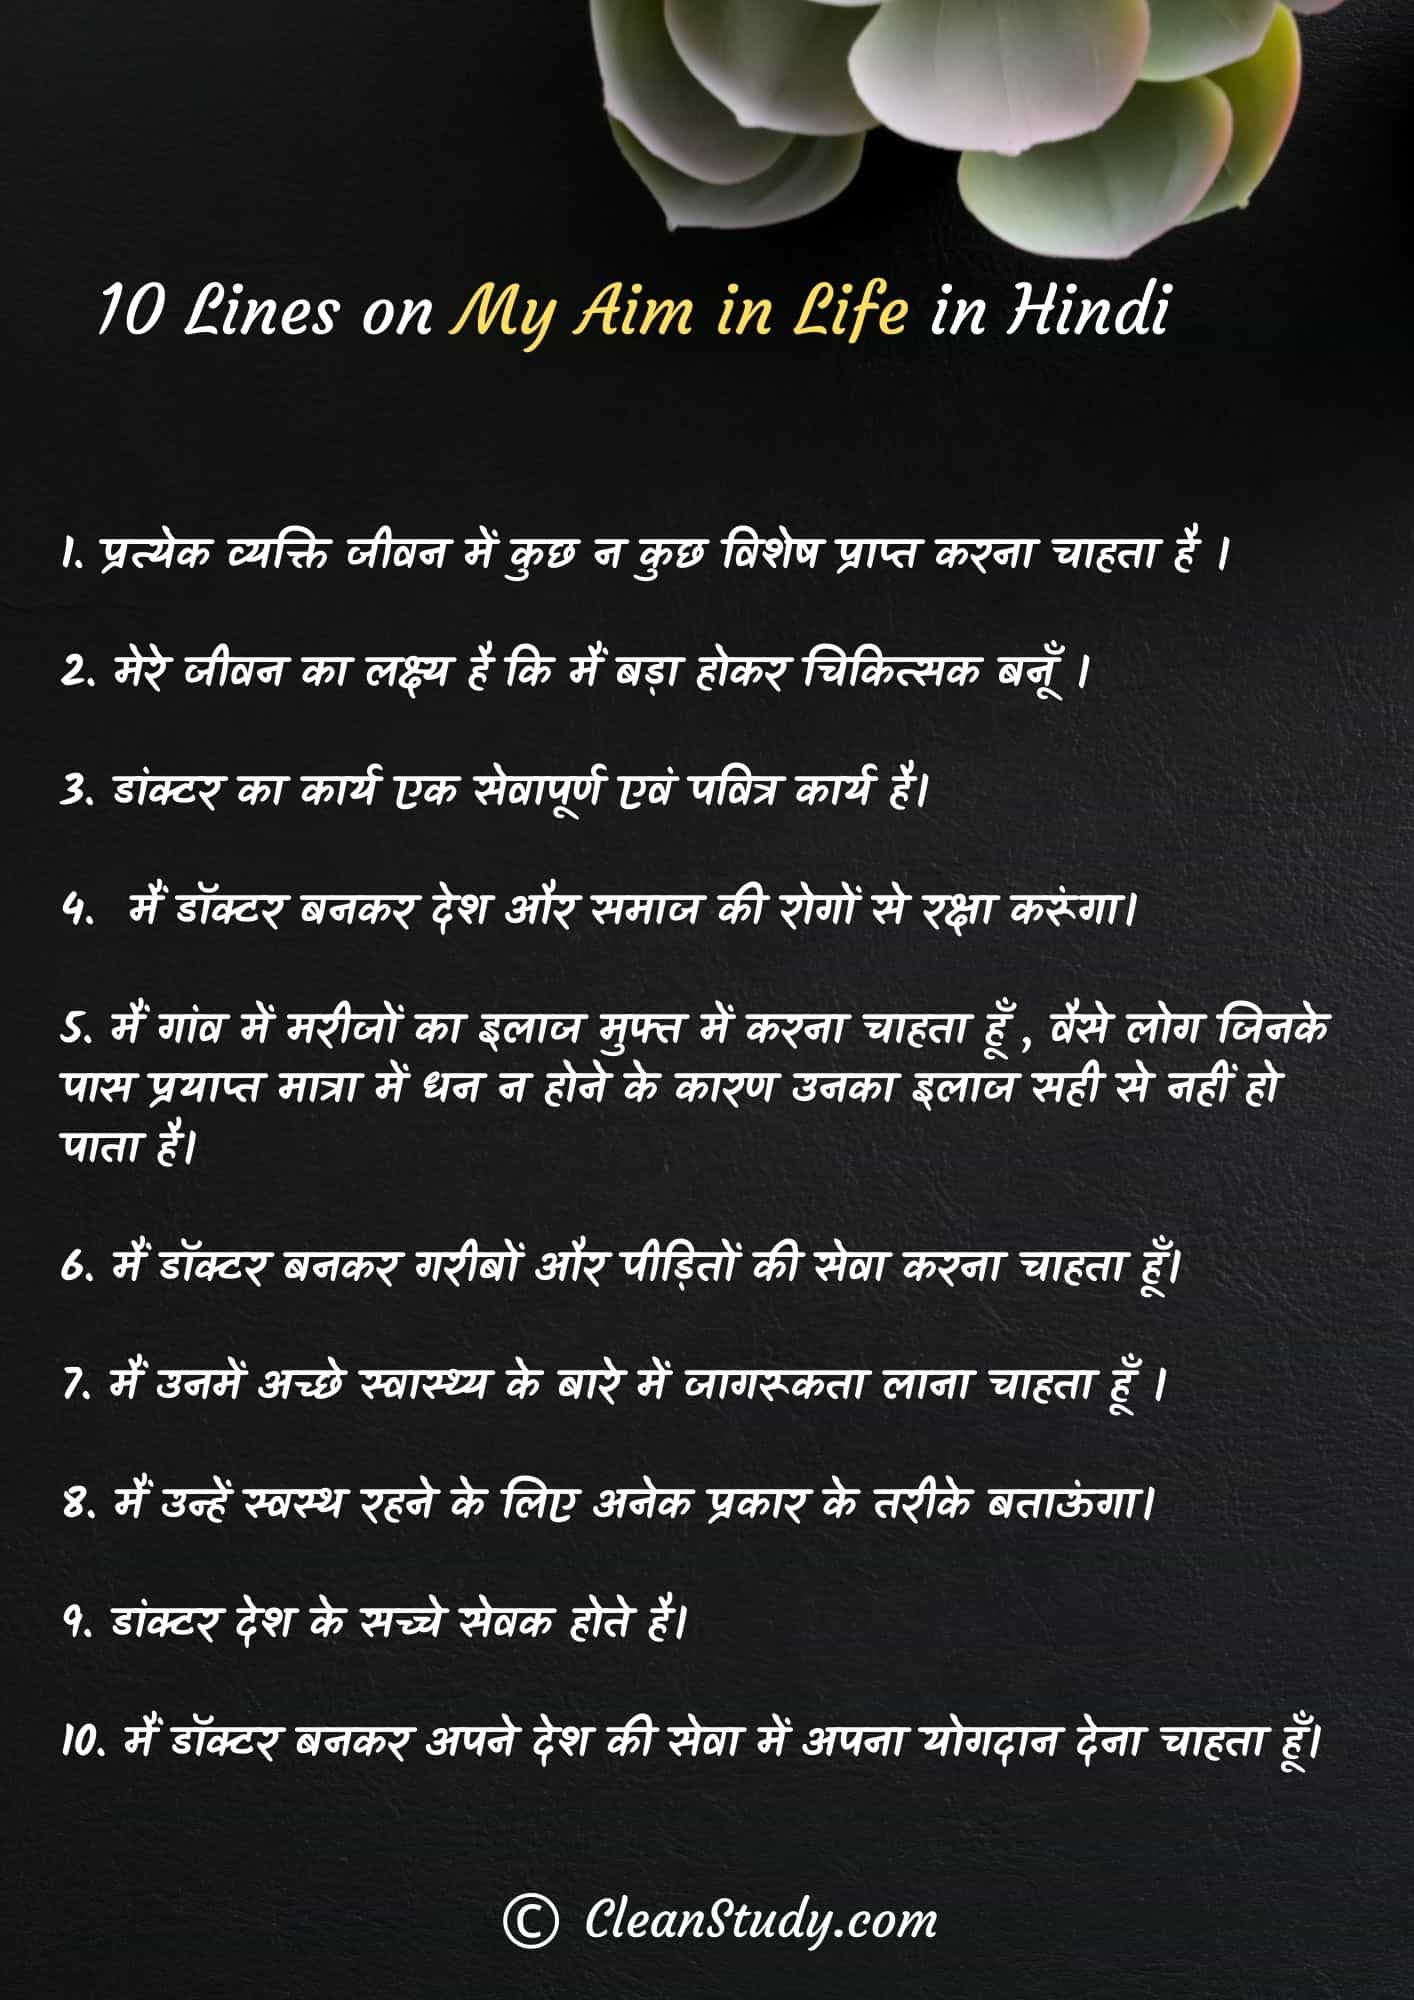 essay on my aim in life in hindi